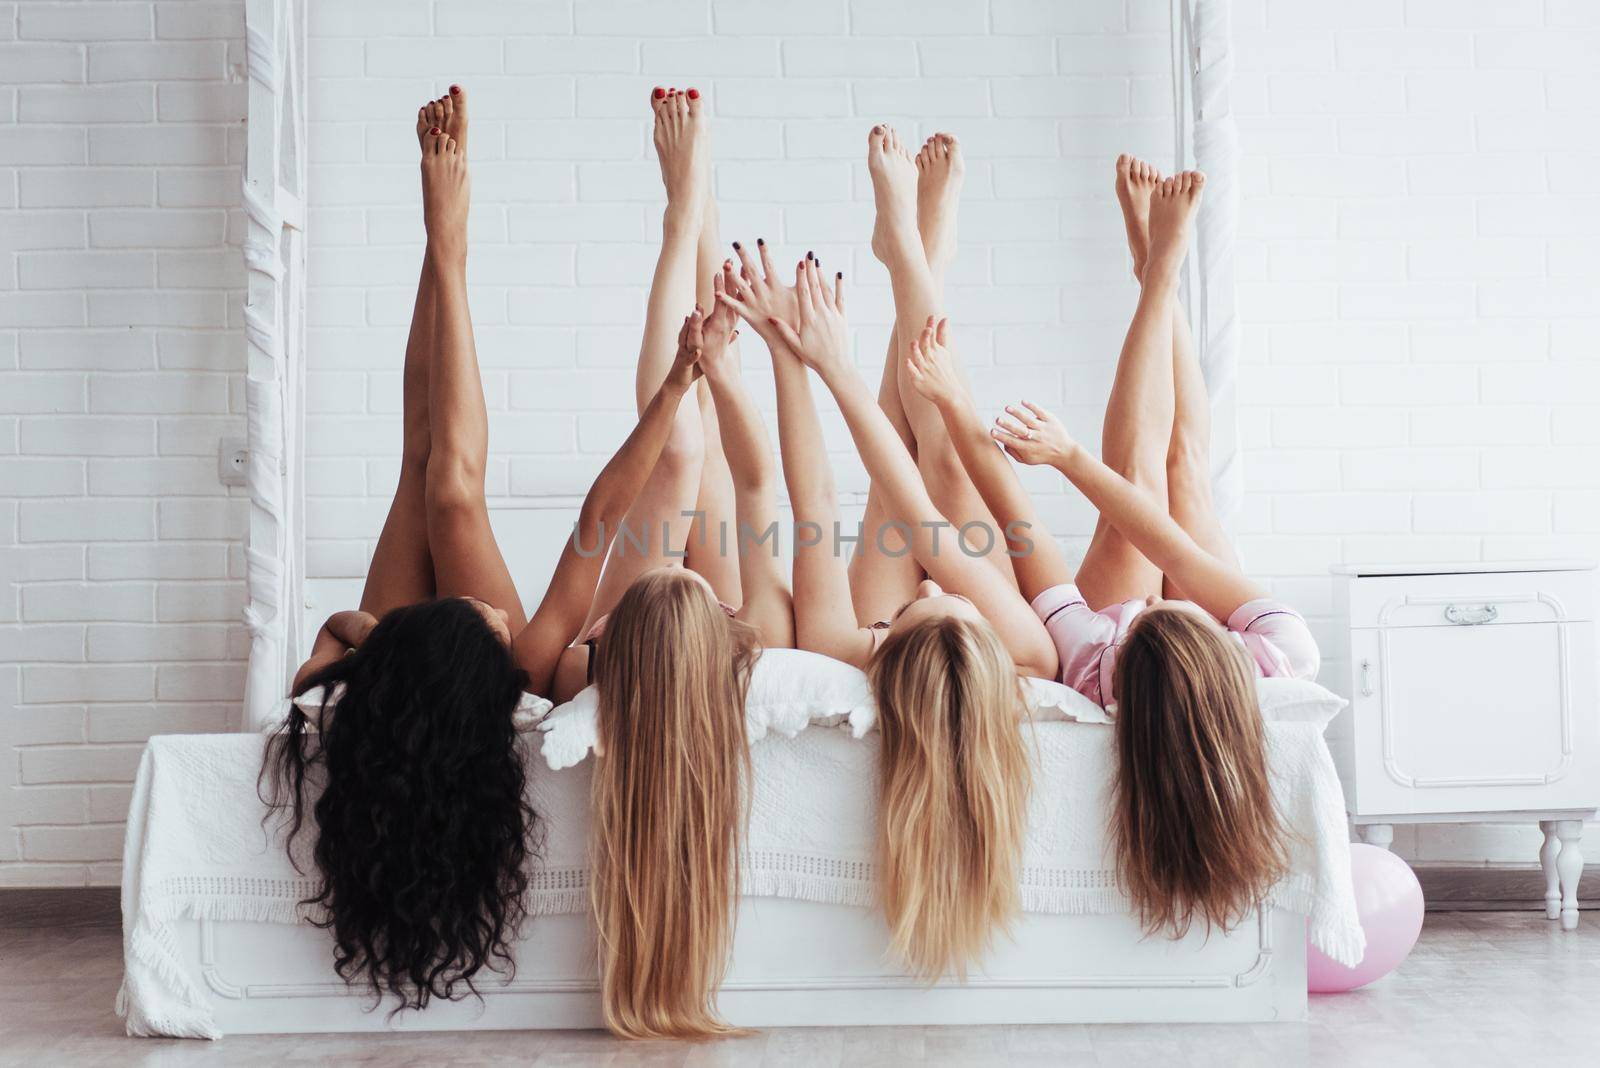 Touching with hands. Four young women with good body shape lying on the bed with their legs up by Standret